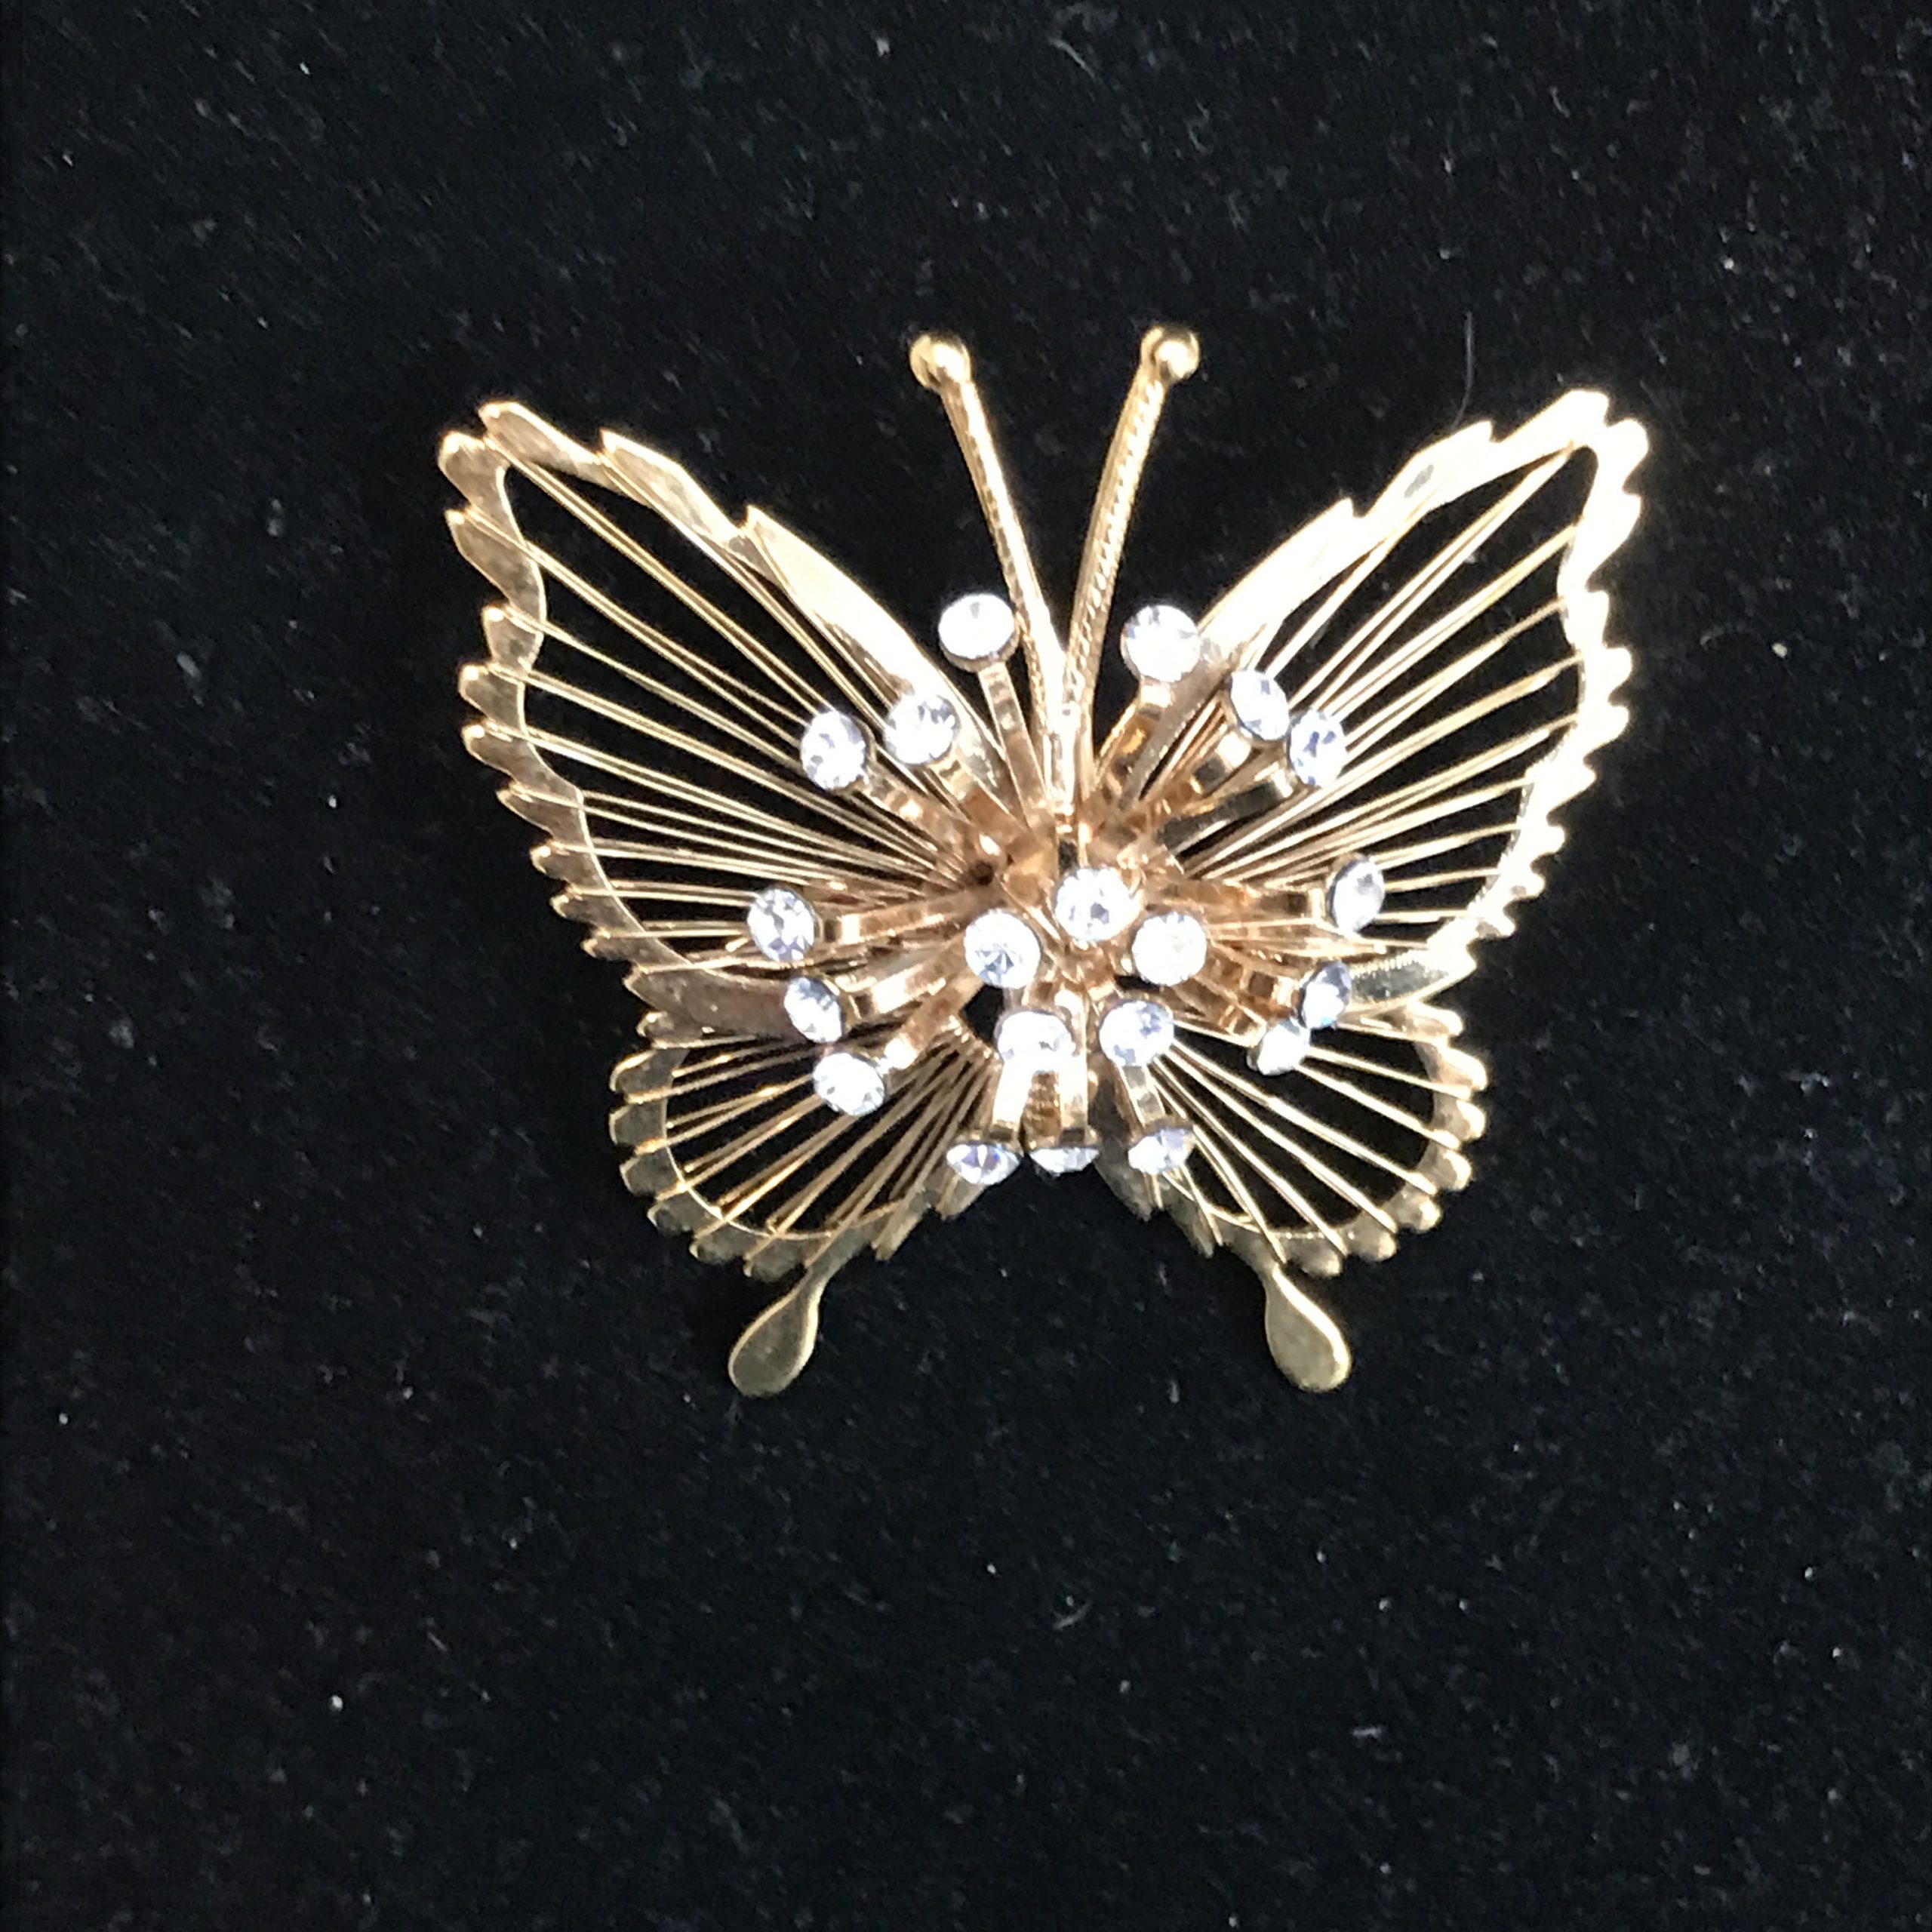 Butterfly Colored Navette Rhinestones Vintage Gold Brooch Pin M-4592